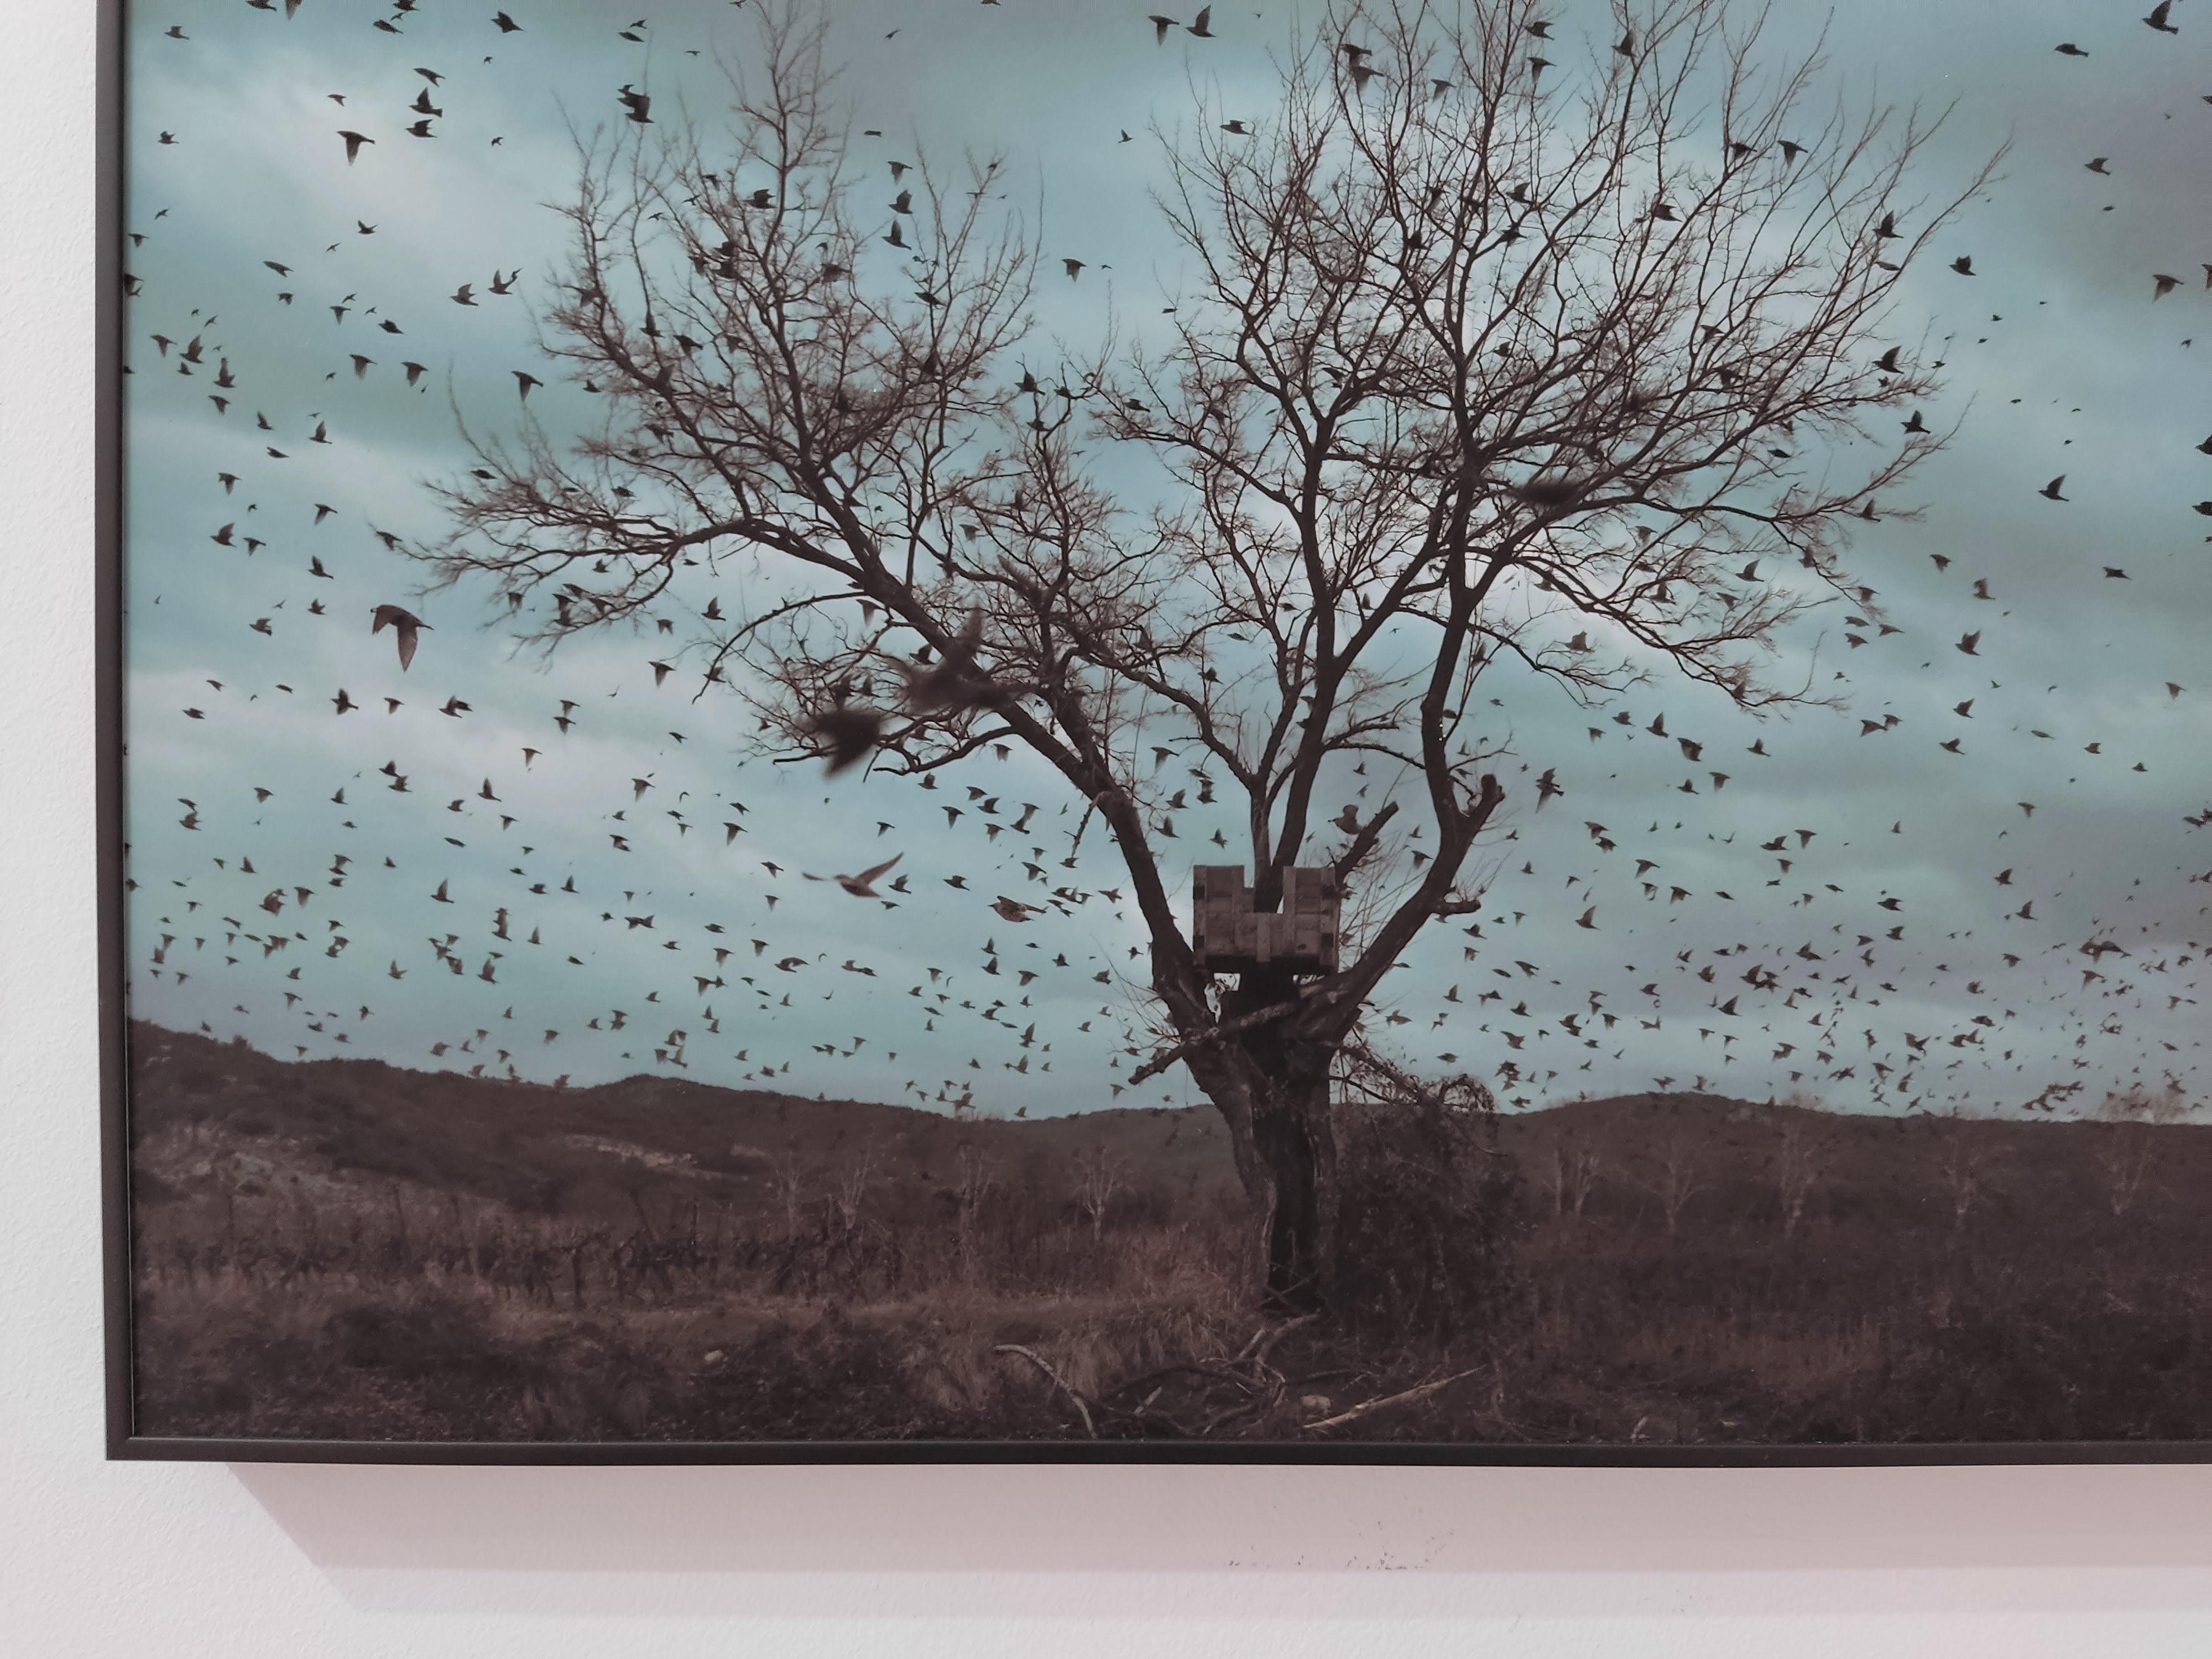 We spoke to the birds - Photography, Limited Edition, Archival pigment print - Gray Landscape Photograph by Johann Fournier